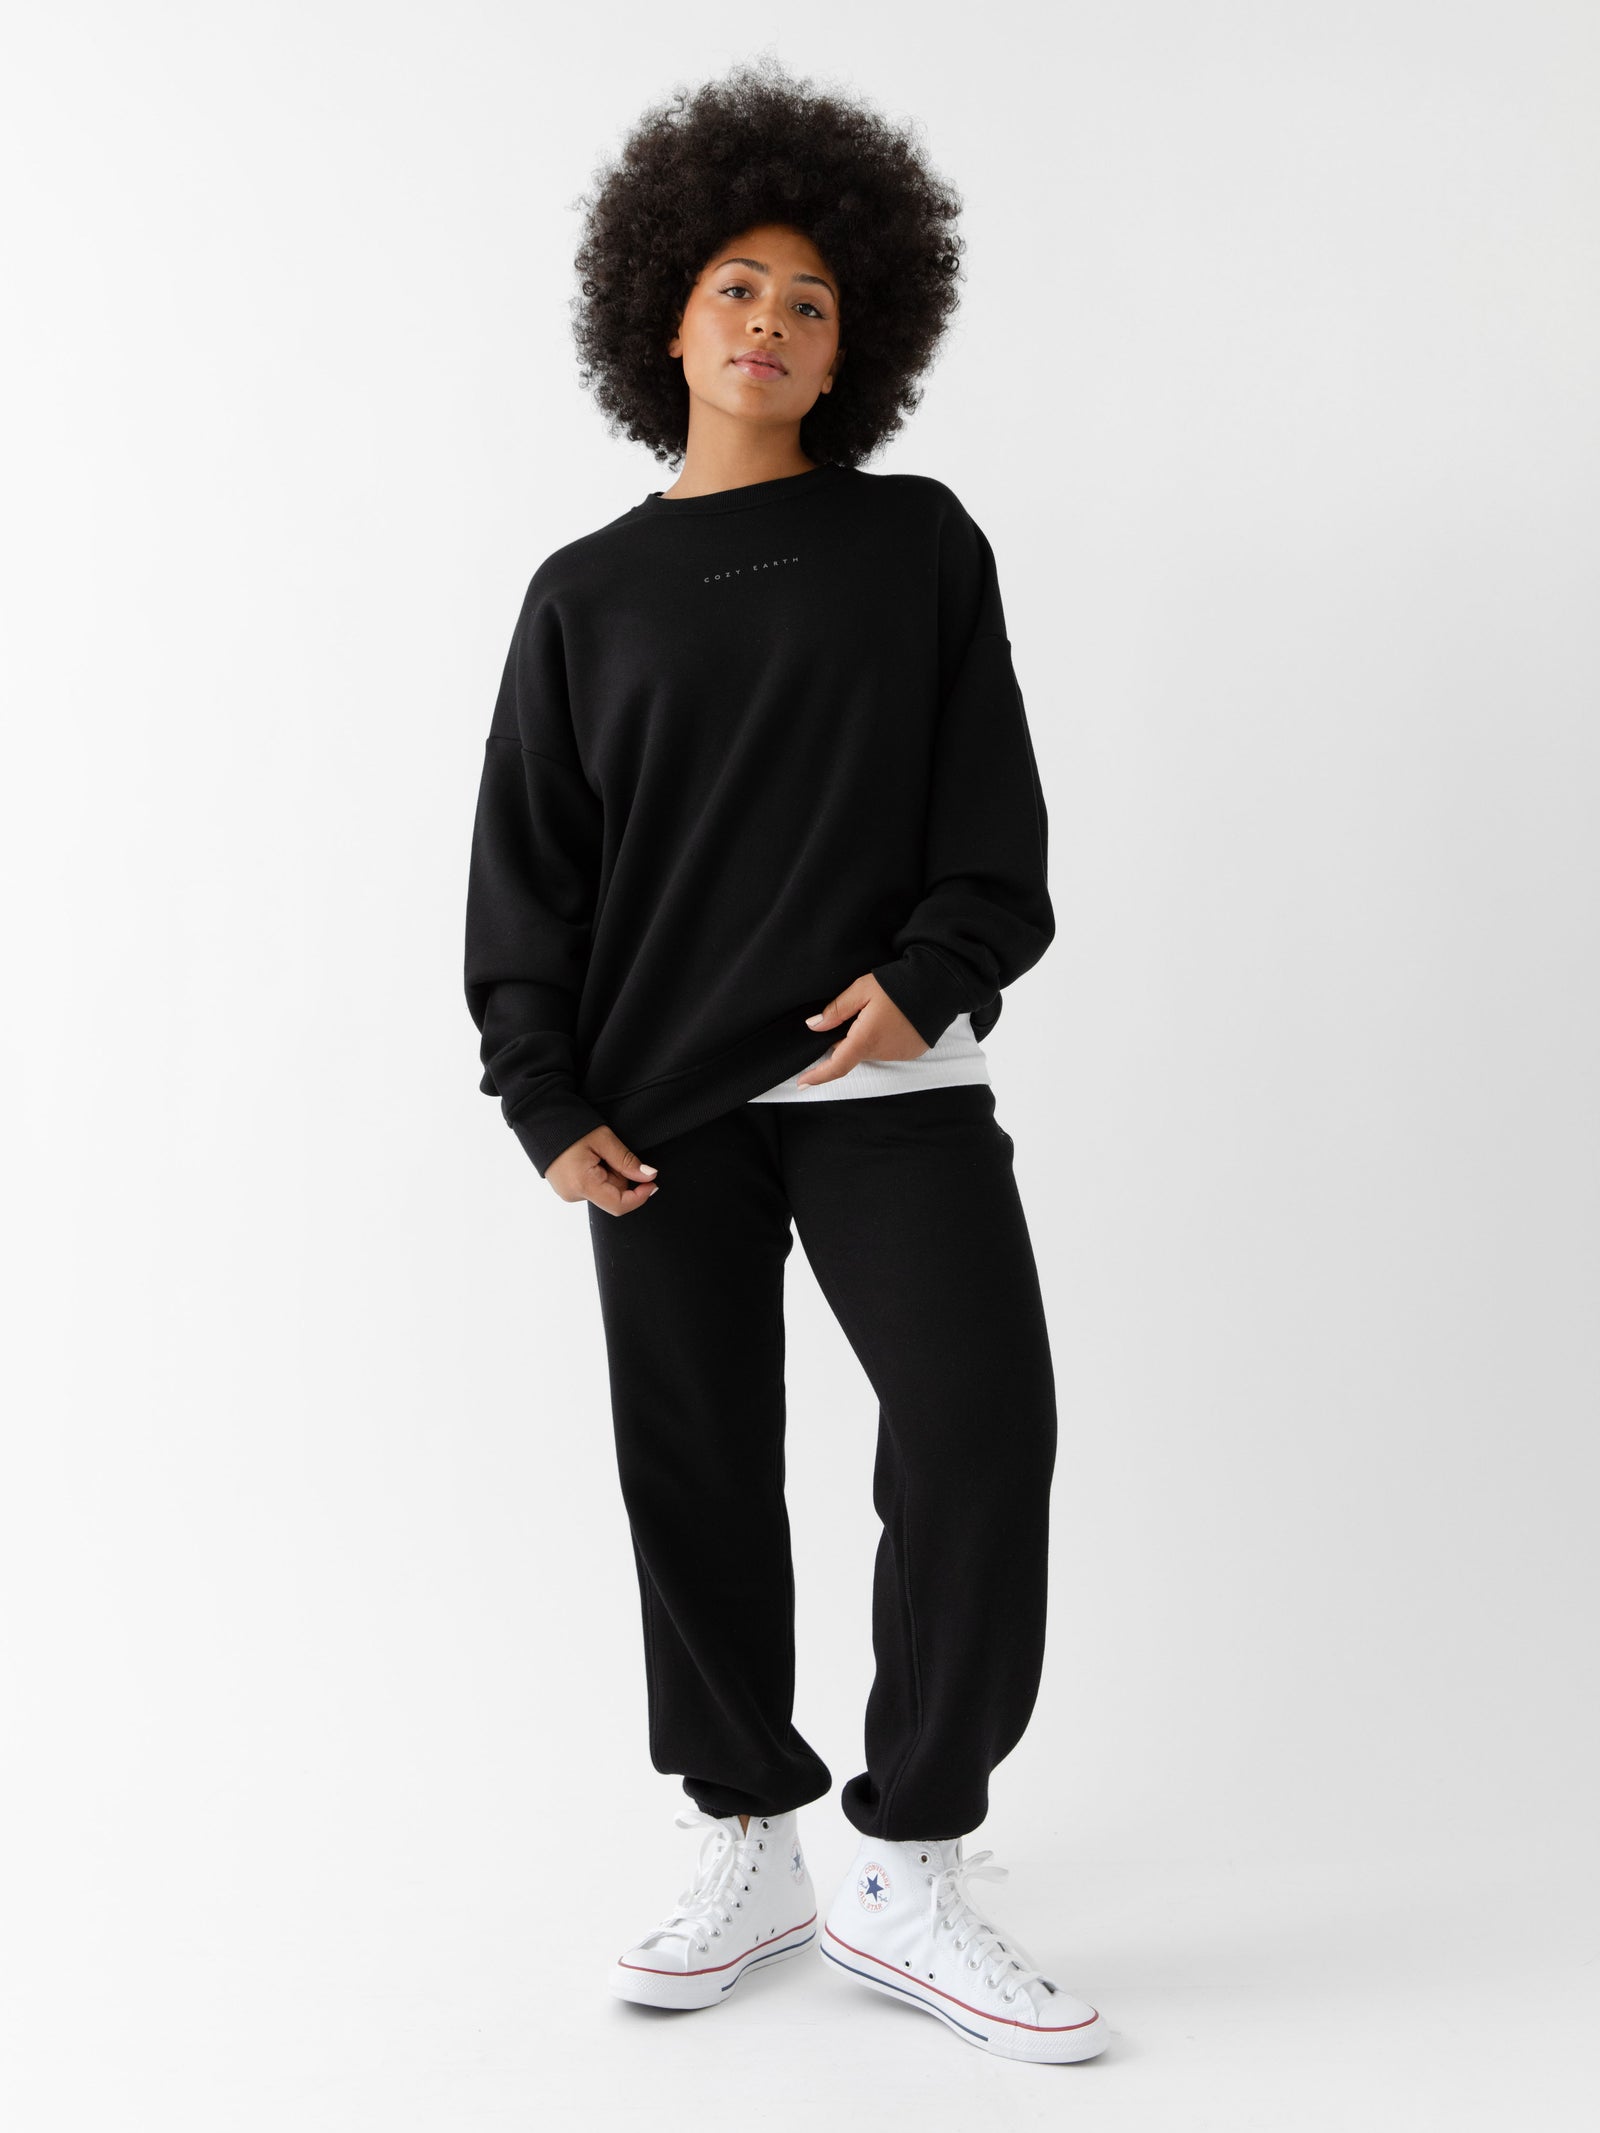 Black CityScape Joggers. The Joggers are being worn by a female model. The photo is taken with the models hand by the pocket of the joggers. The back ground is a crisp white background. 